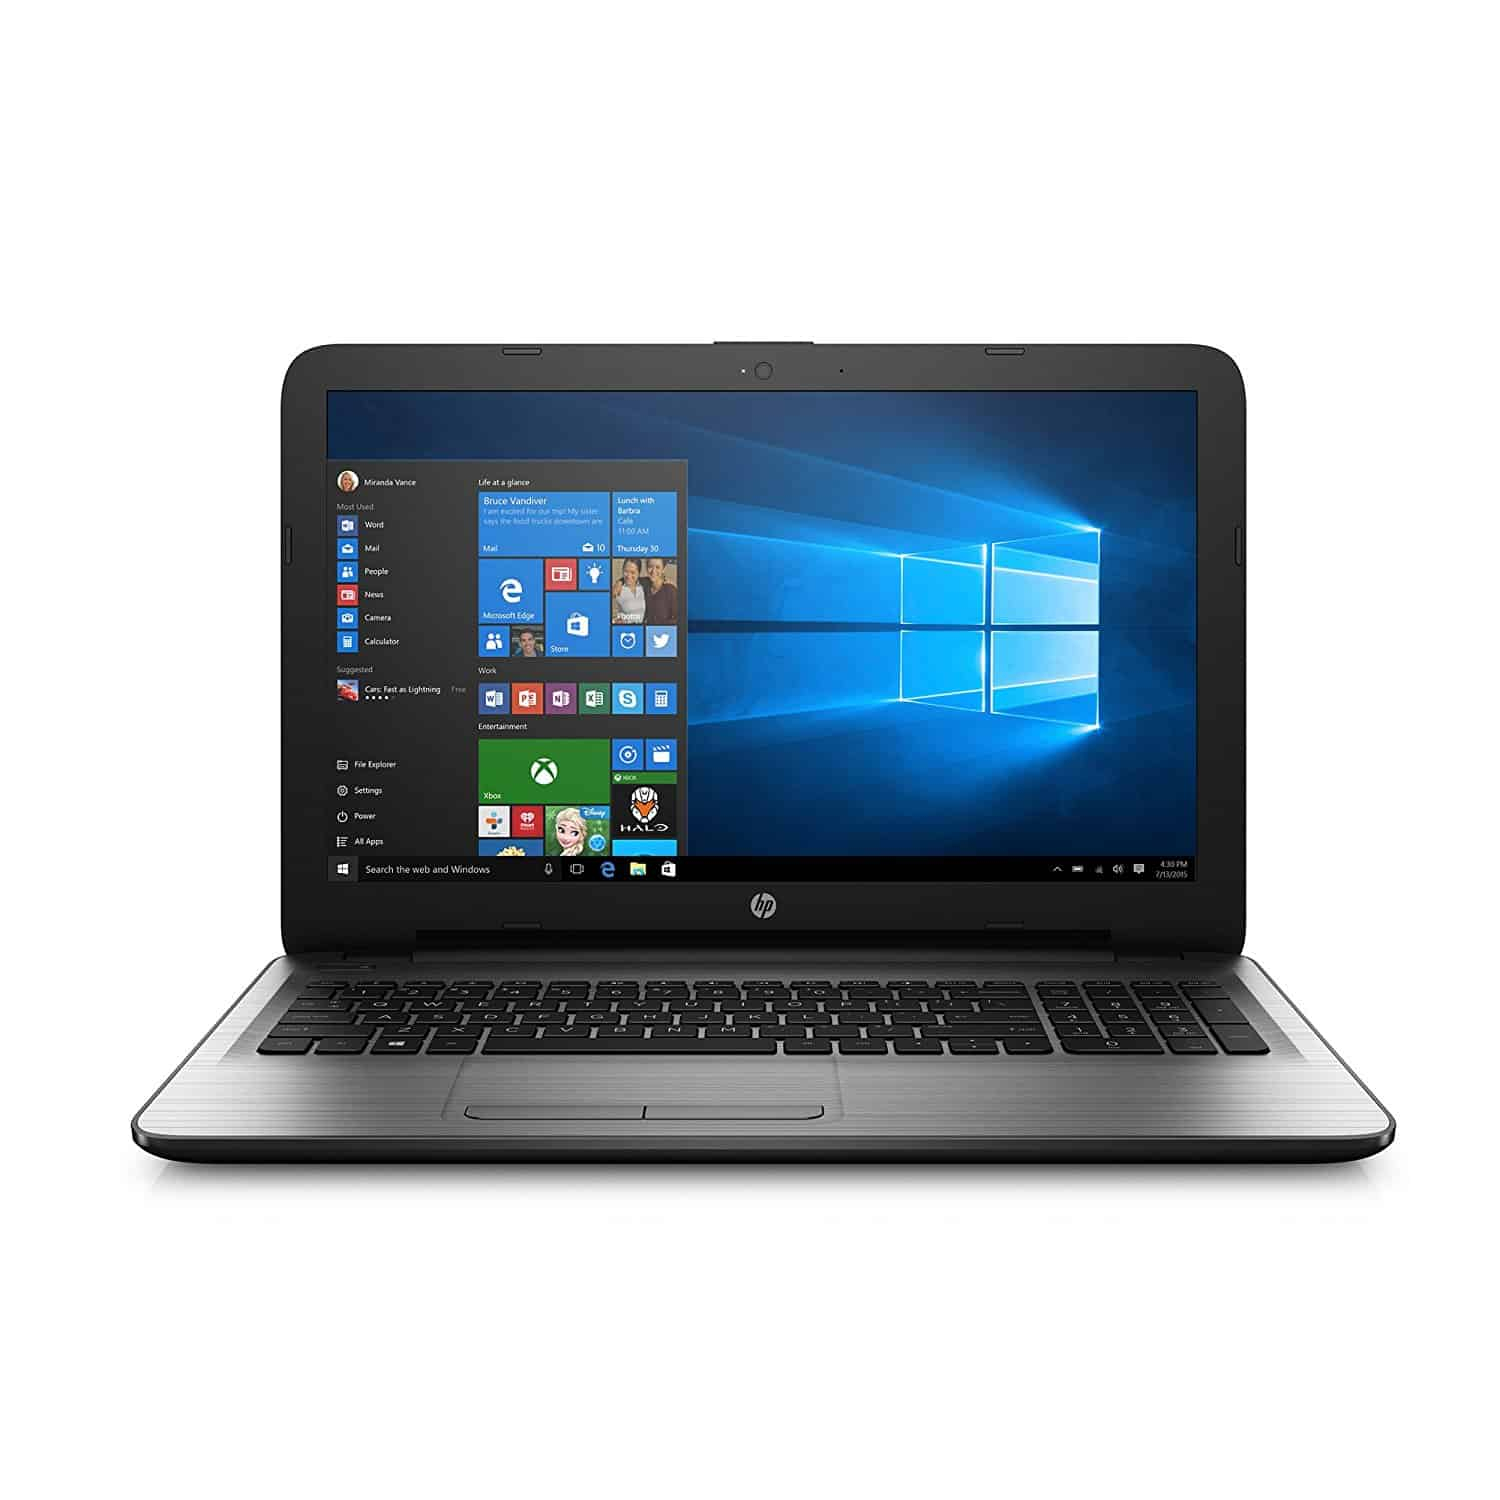 Best Laptop For Excel Spreadsheets Regarding 10 Best Laptops For Word Processing And Excel – 2019  Blw